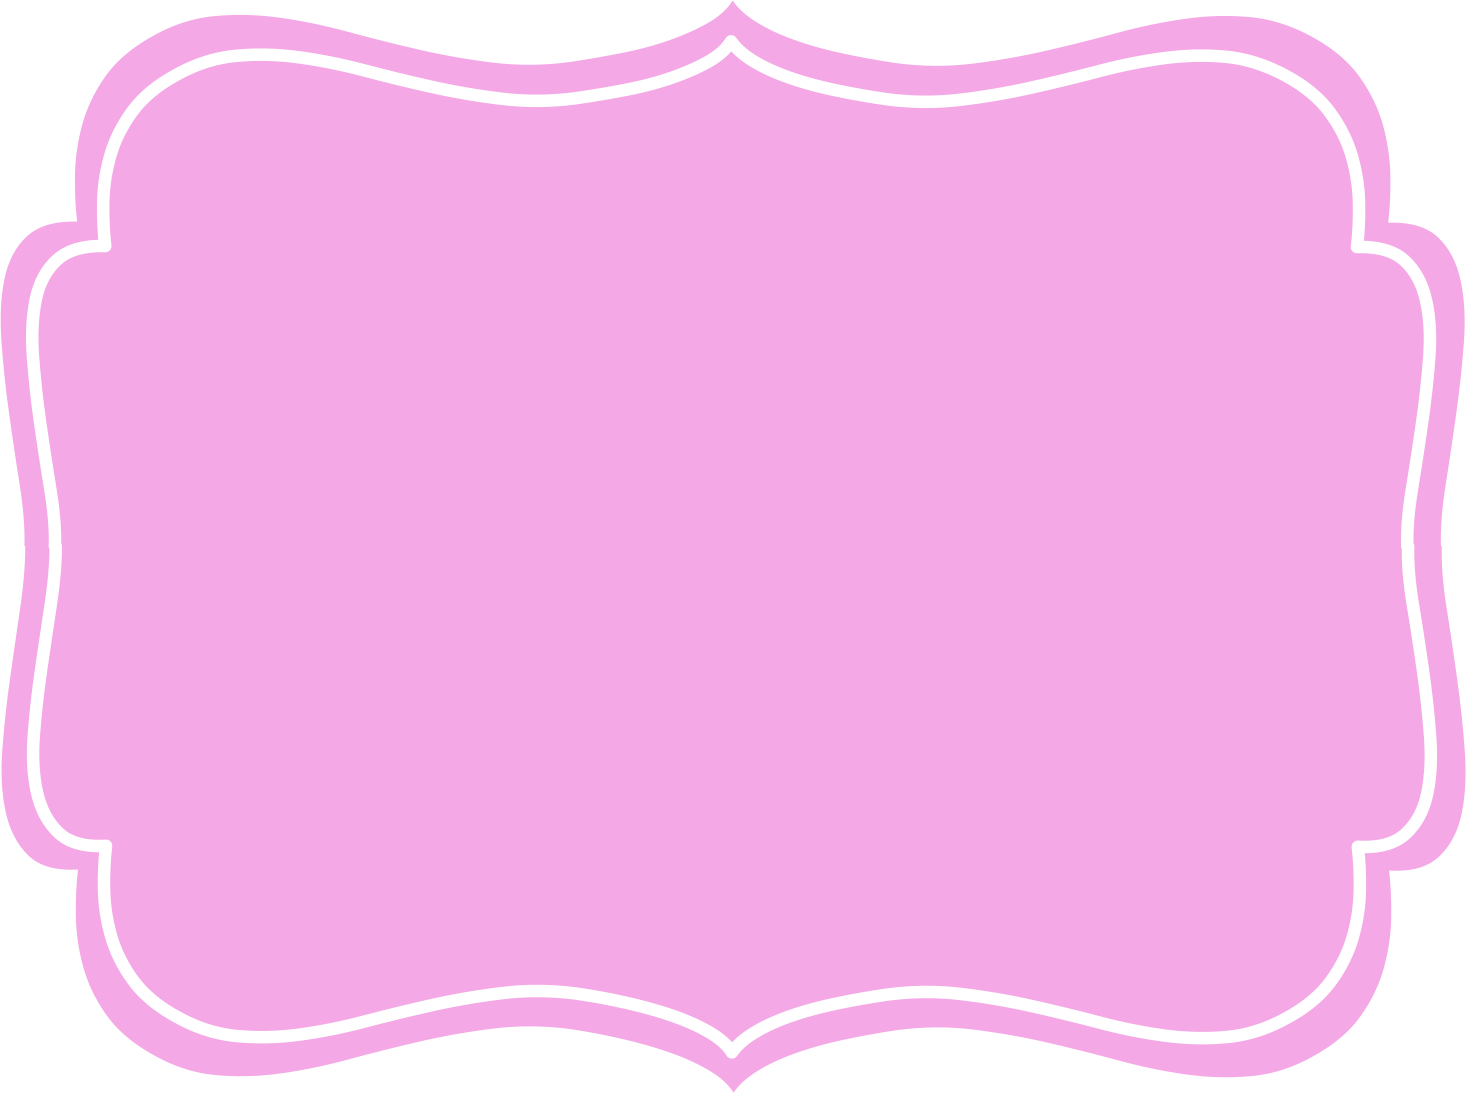 Transparent label pink and.